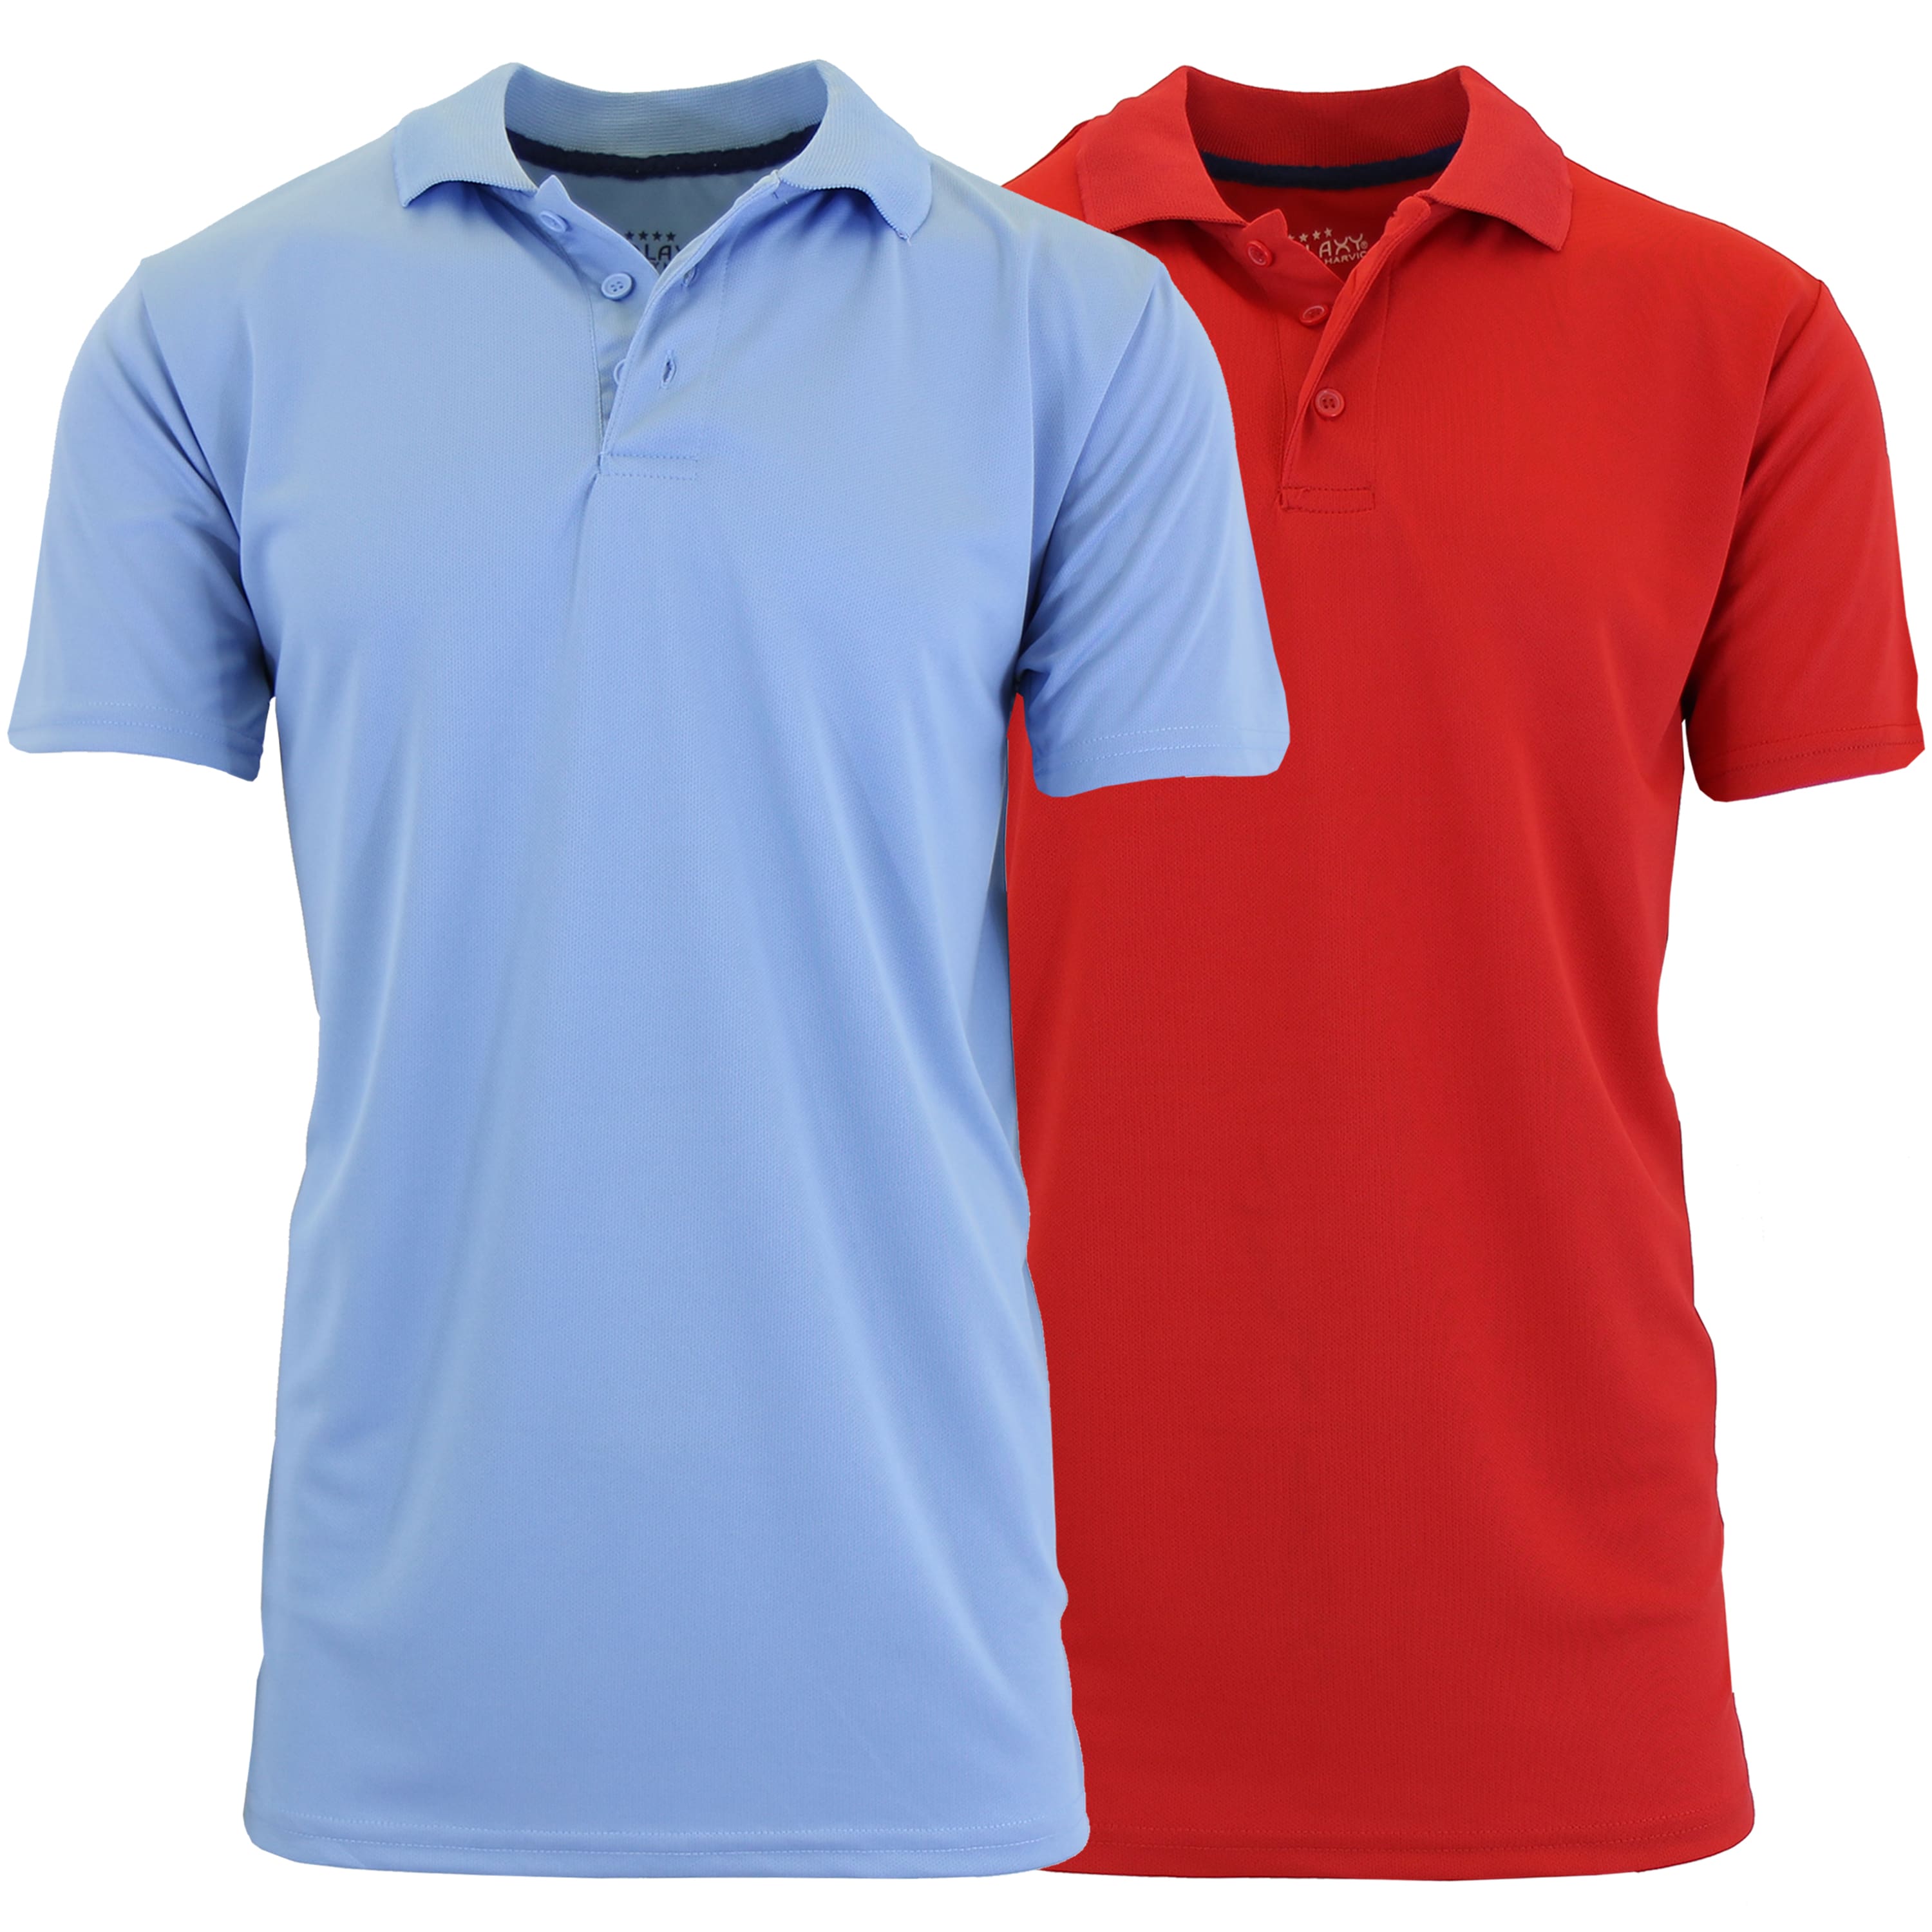 Galaxy by Harvic Tagless Dry-Fit Moisture-Wicking Men&#x27;s Polo Shirt 2 Pack